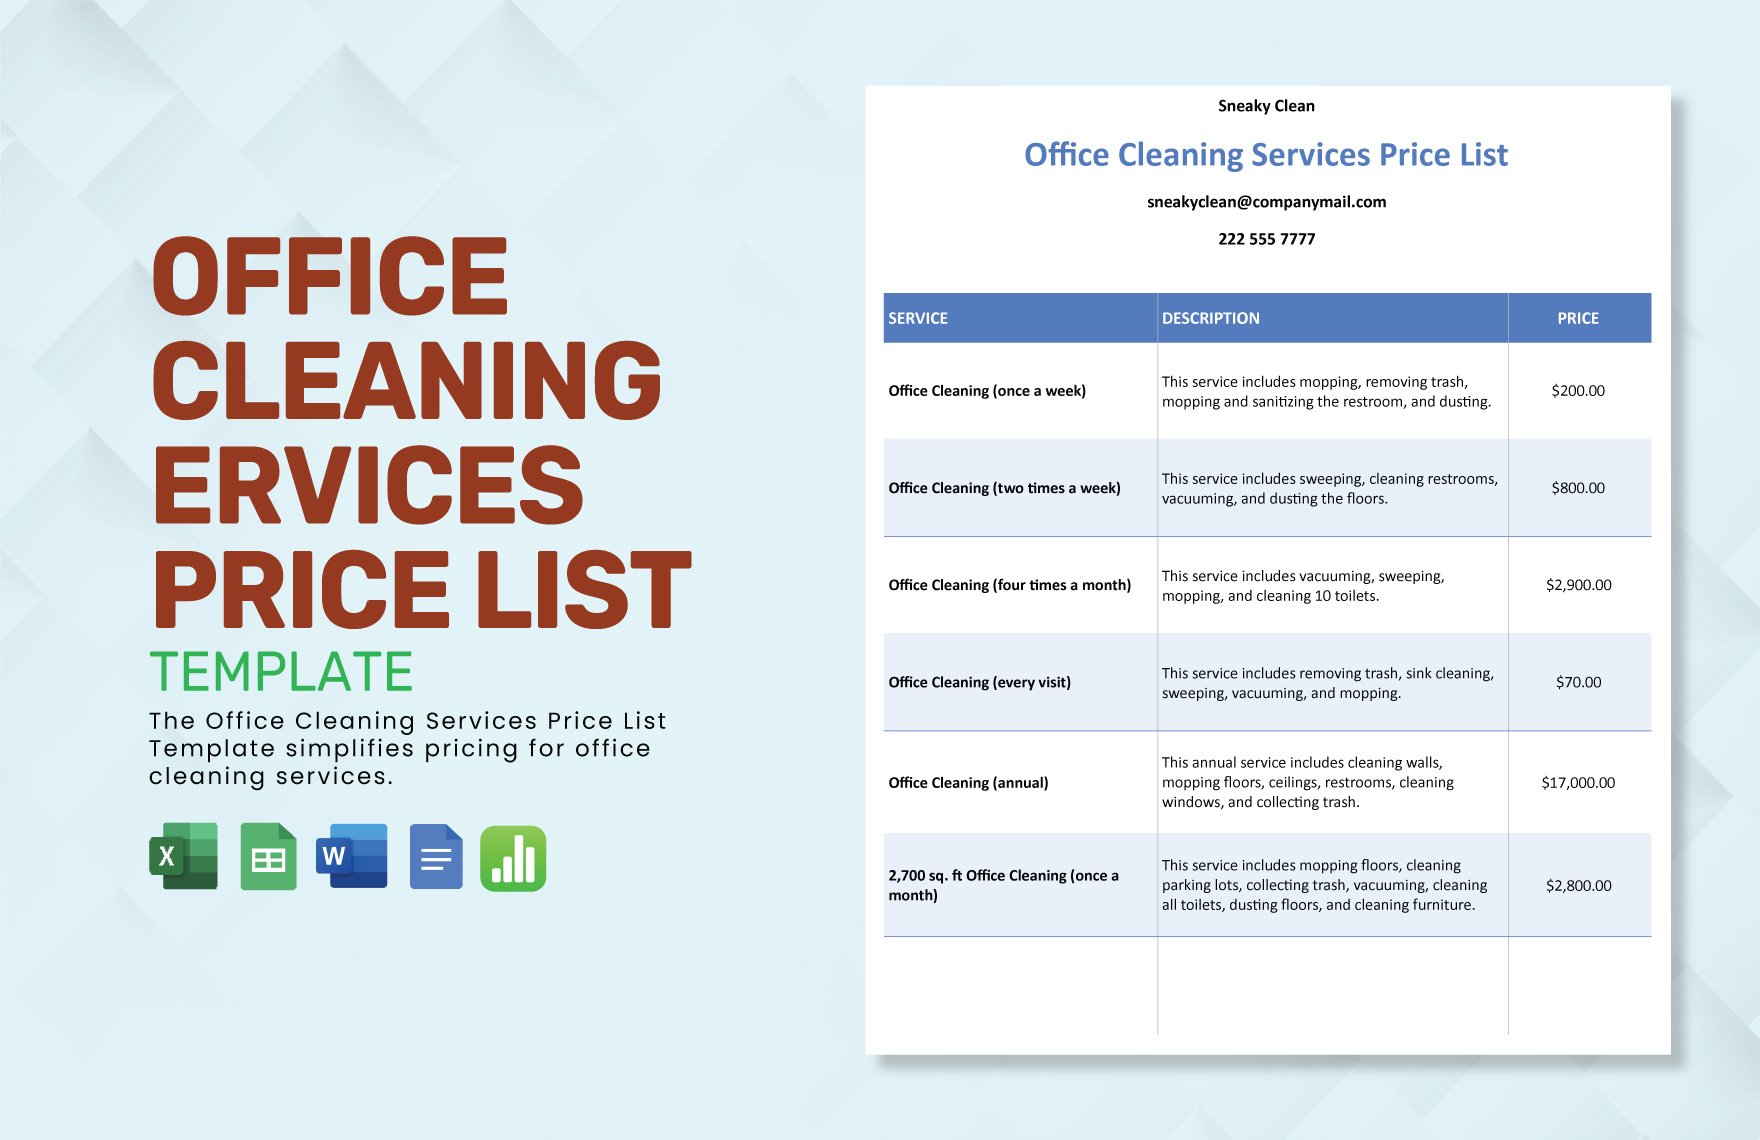 Office Cleaning Services Price List Template